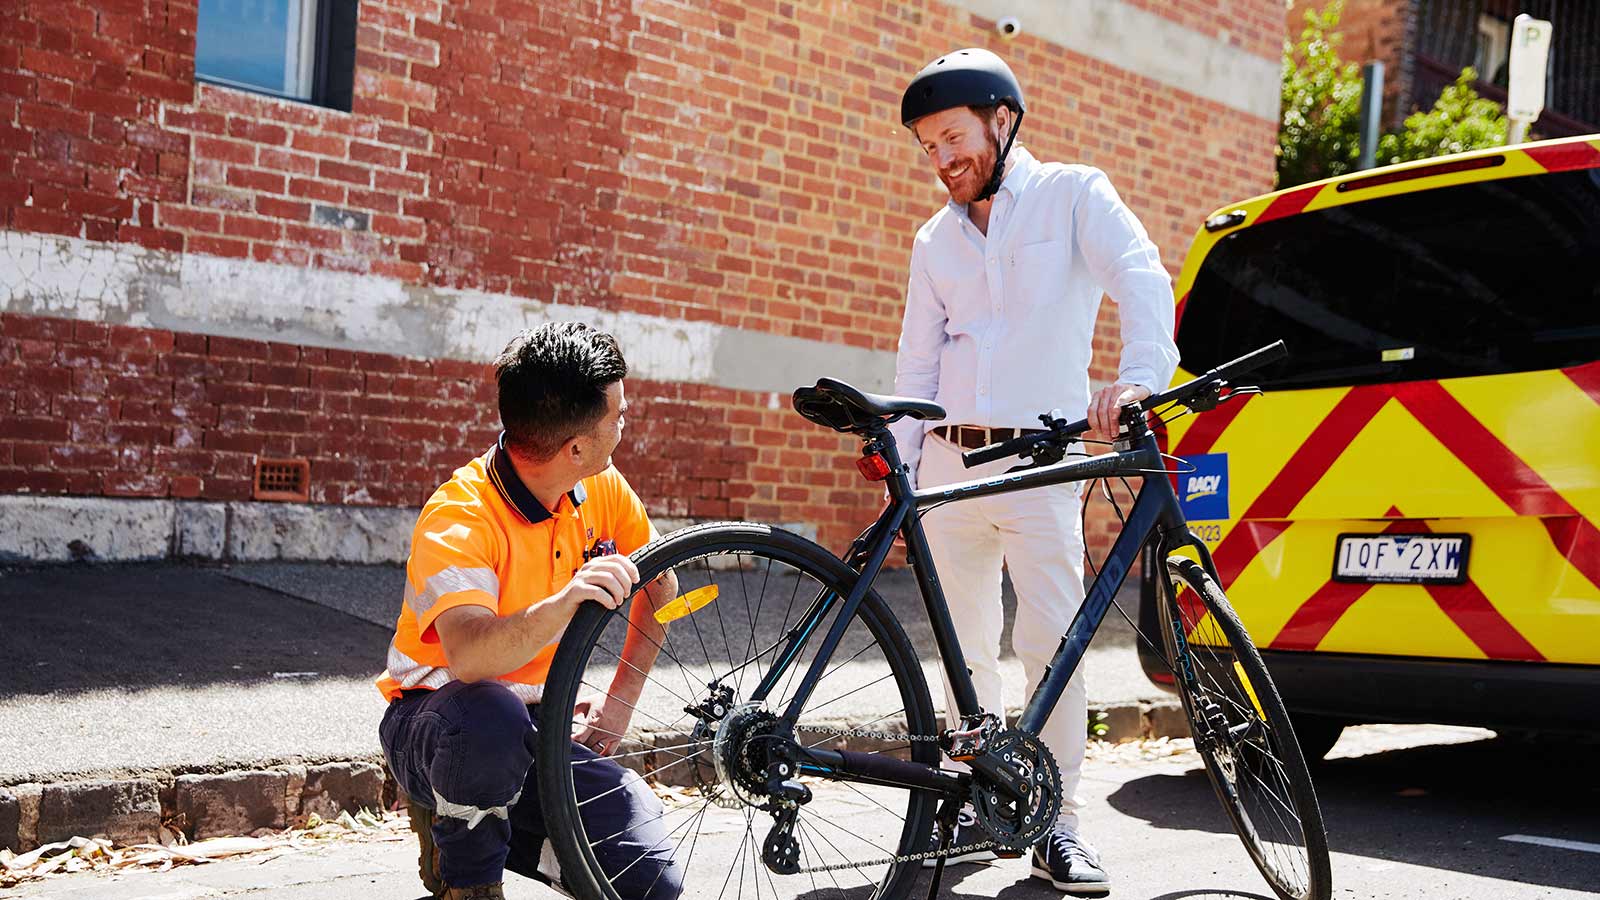 RACV technician assessing a bike and speaking with a smiling customer, with the RACV yellow patrol van behind them.